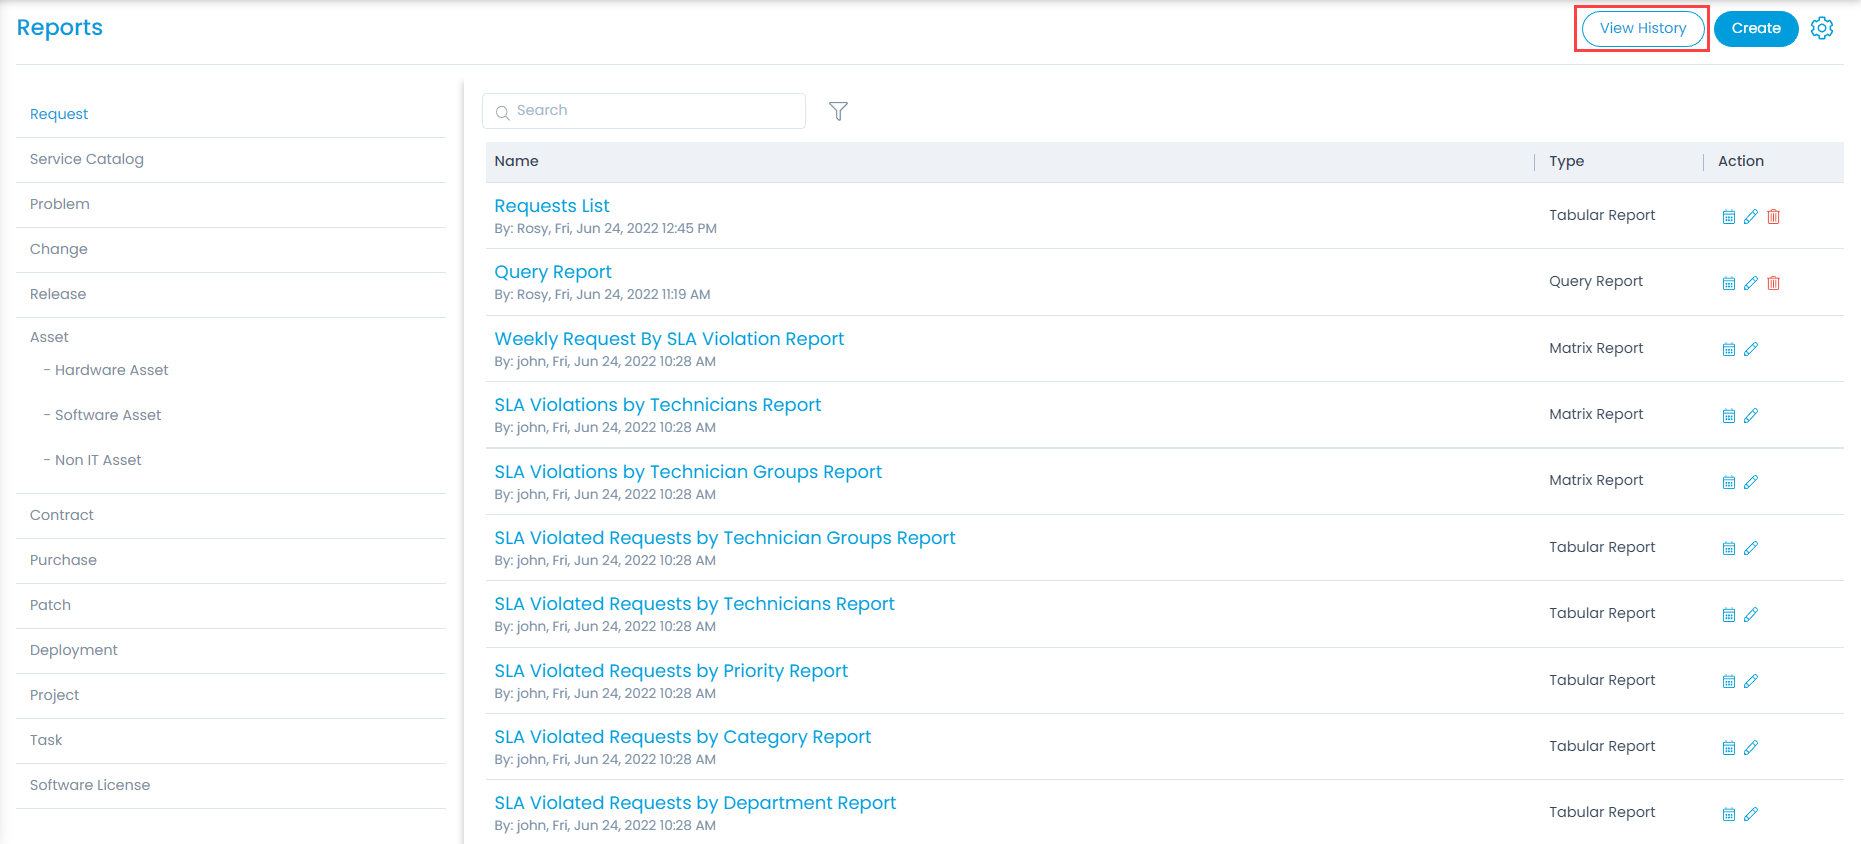 View History of All the Reports